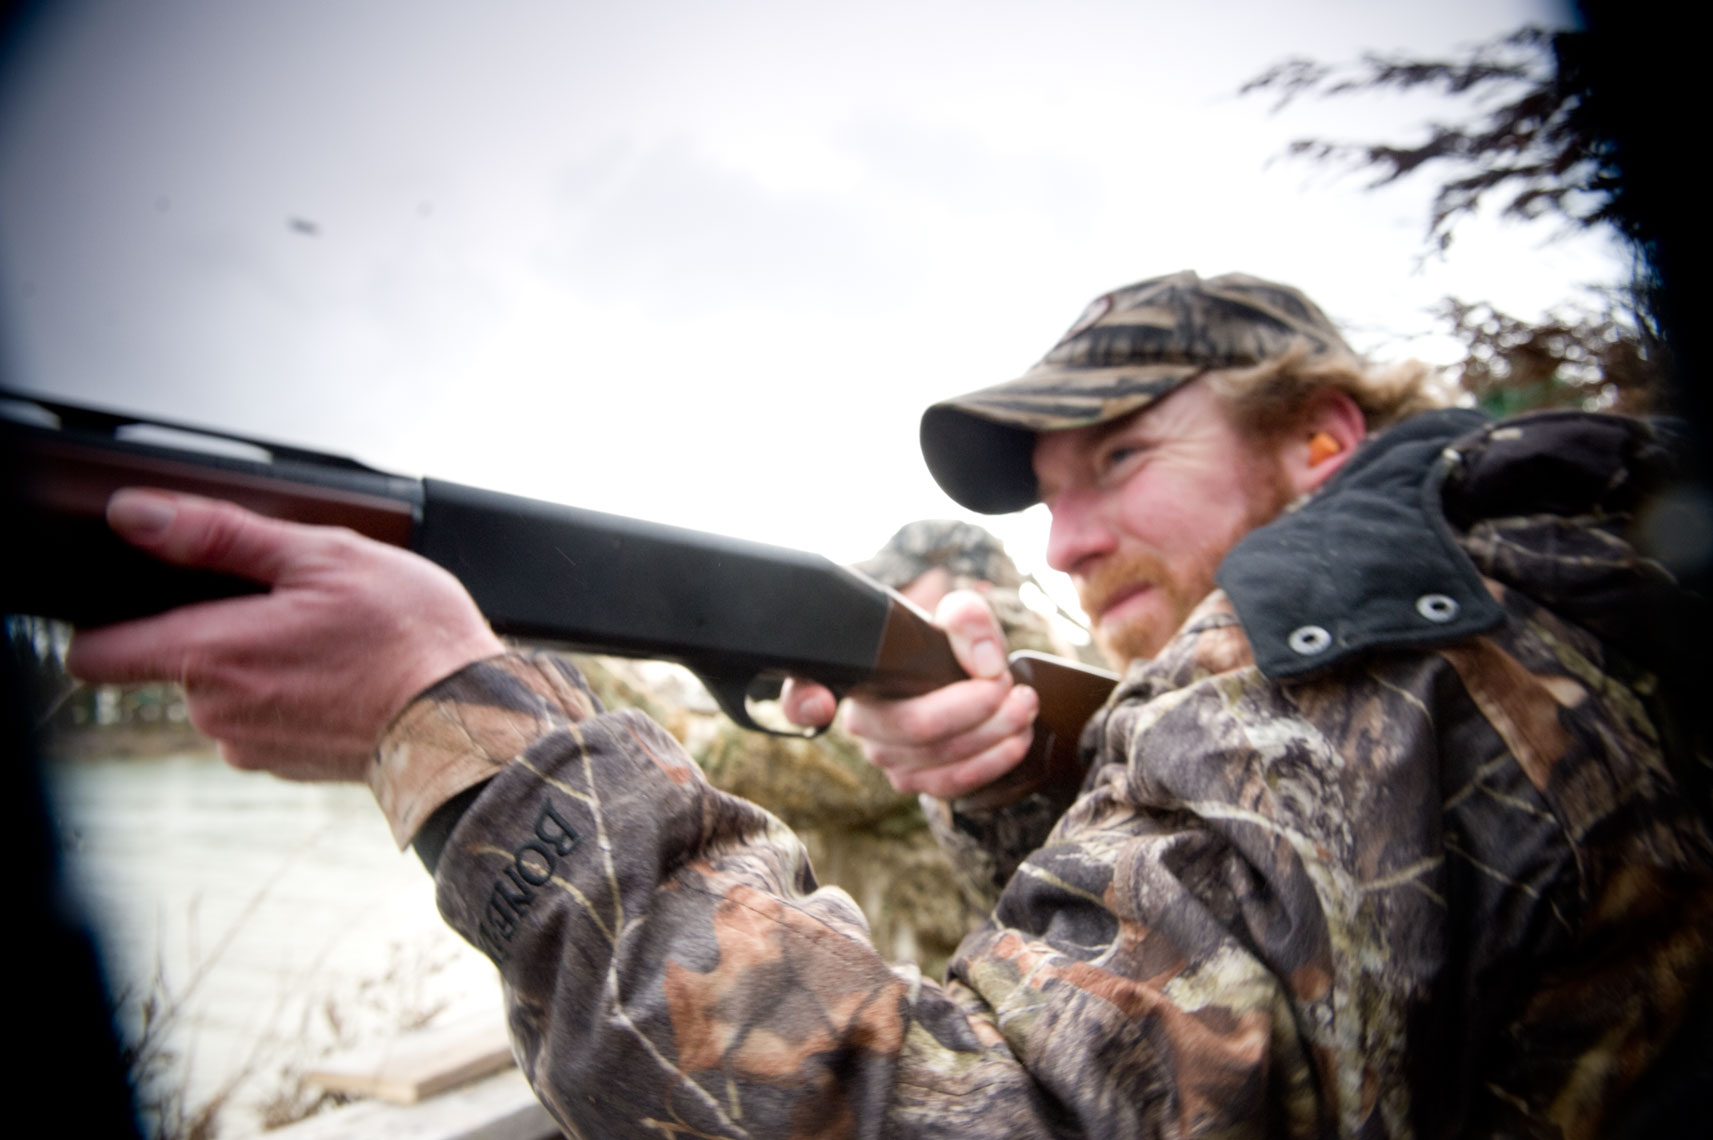 Hunting for waterfowl on the Eastern Shore of Maryland: hunter fires his shotgun at the approaching birds